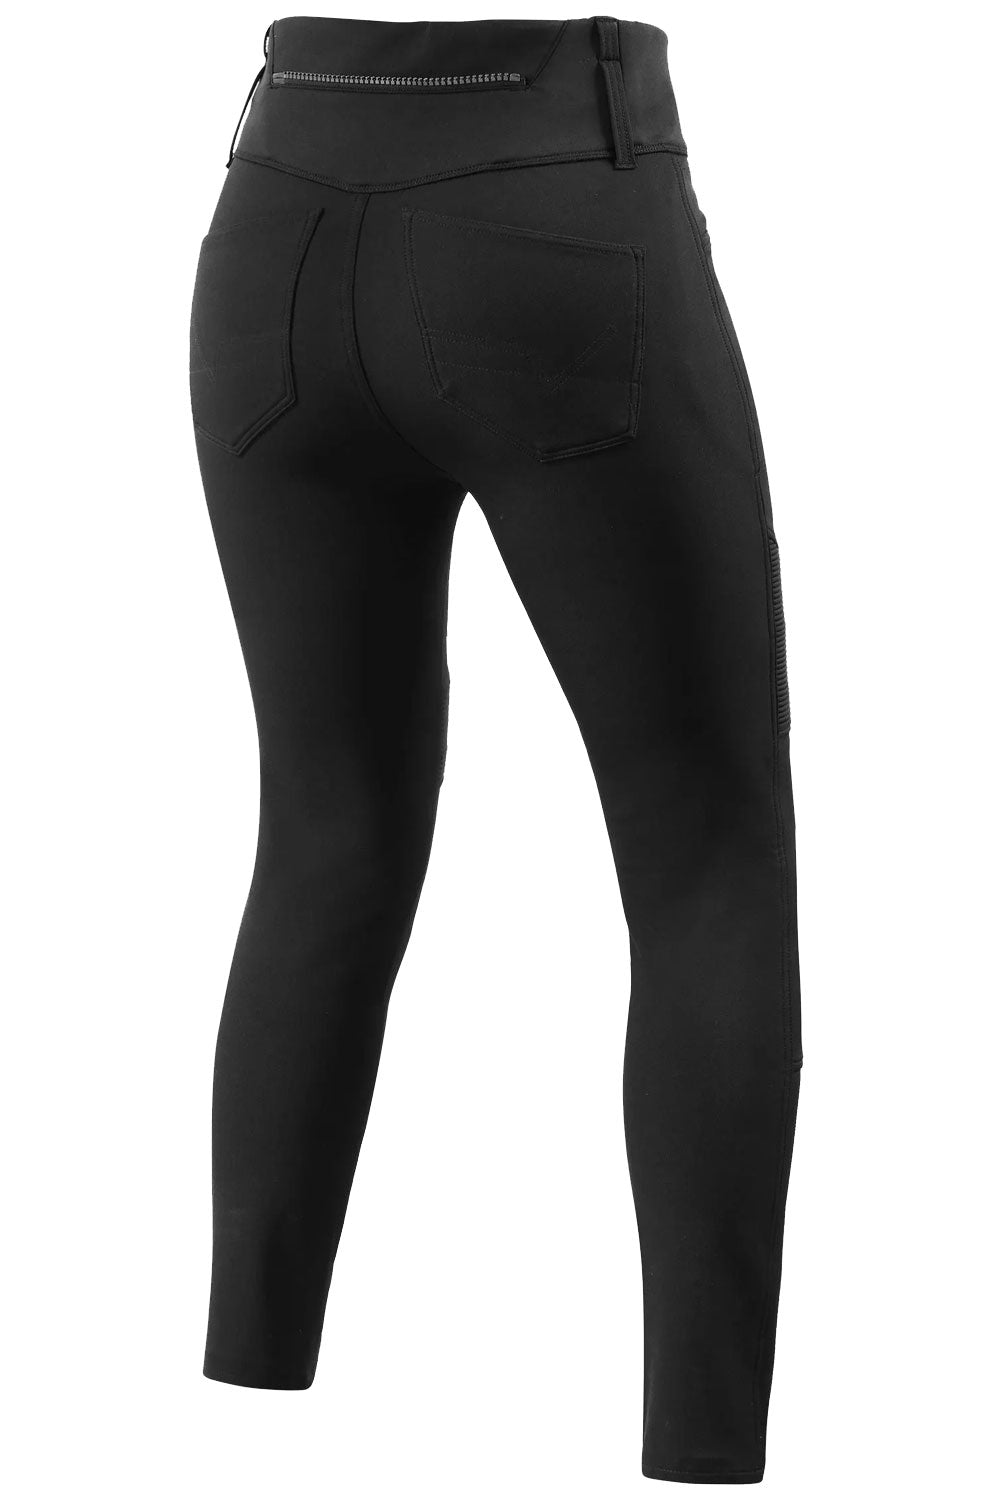 Gogo Gear Womens Kevlar Motorcycle Leggings Protective Riding Pants Black  10 for sale online